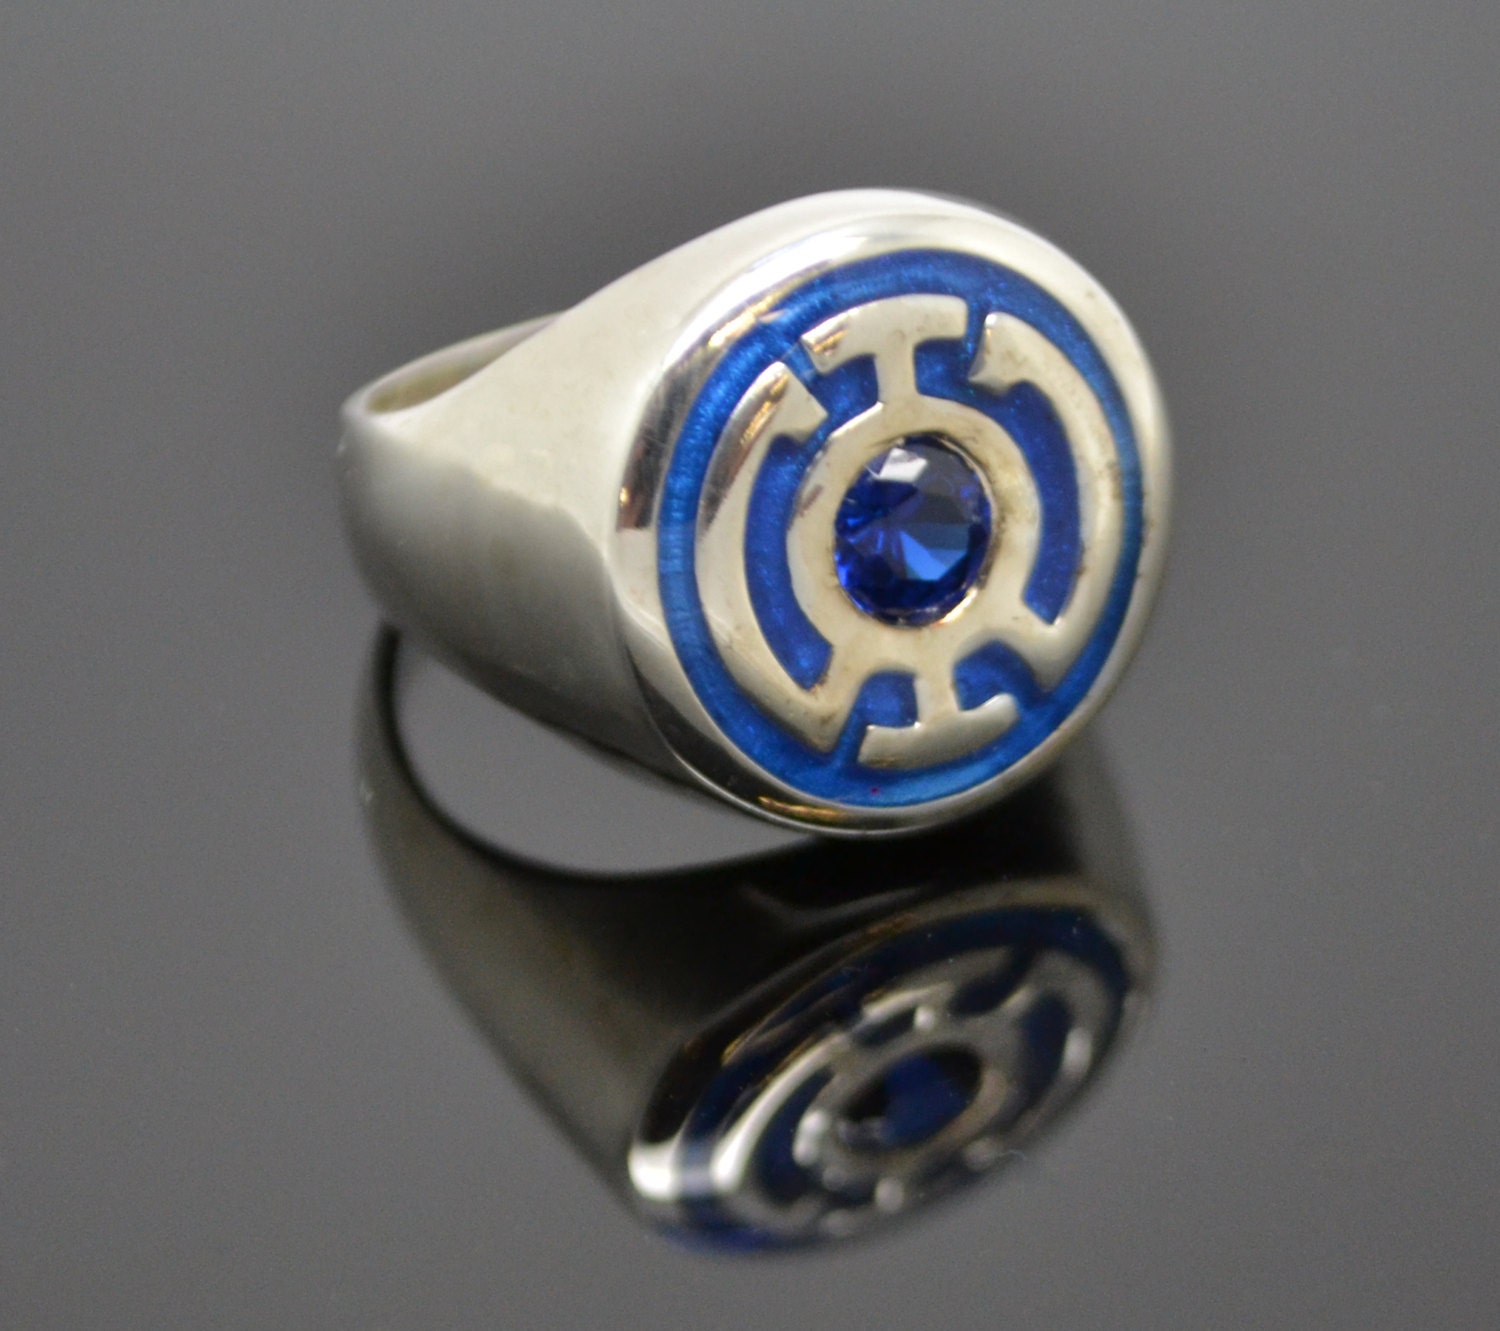 blue lantern ring inspired by WhatsYourPassion on Etsy